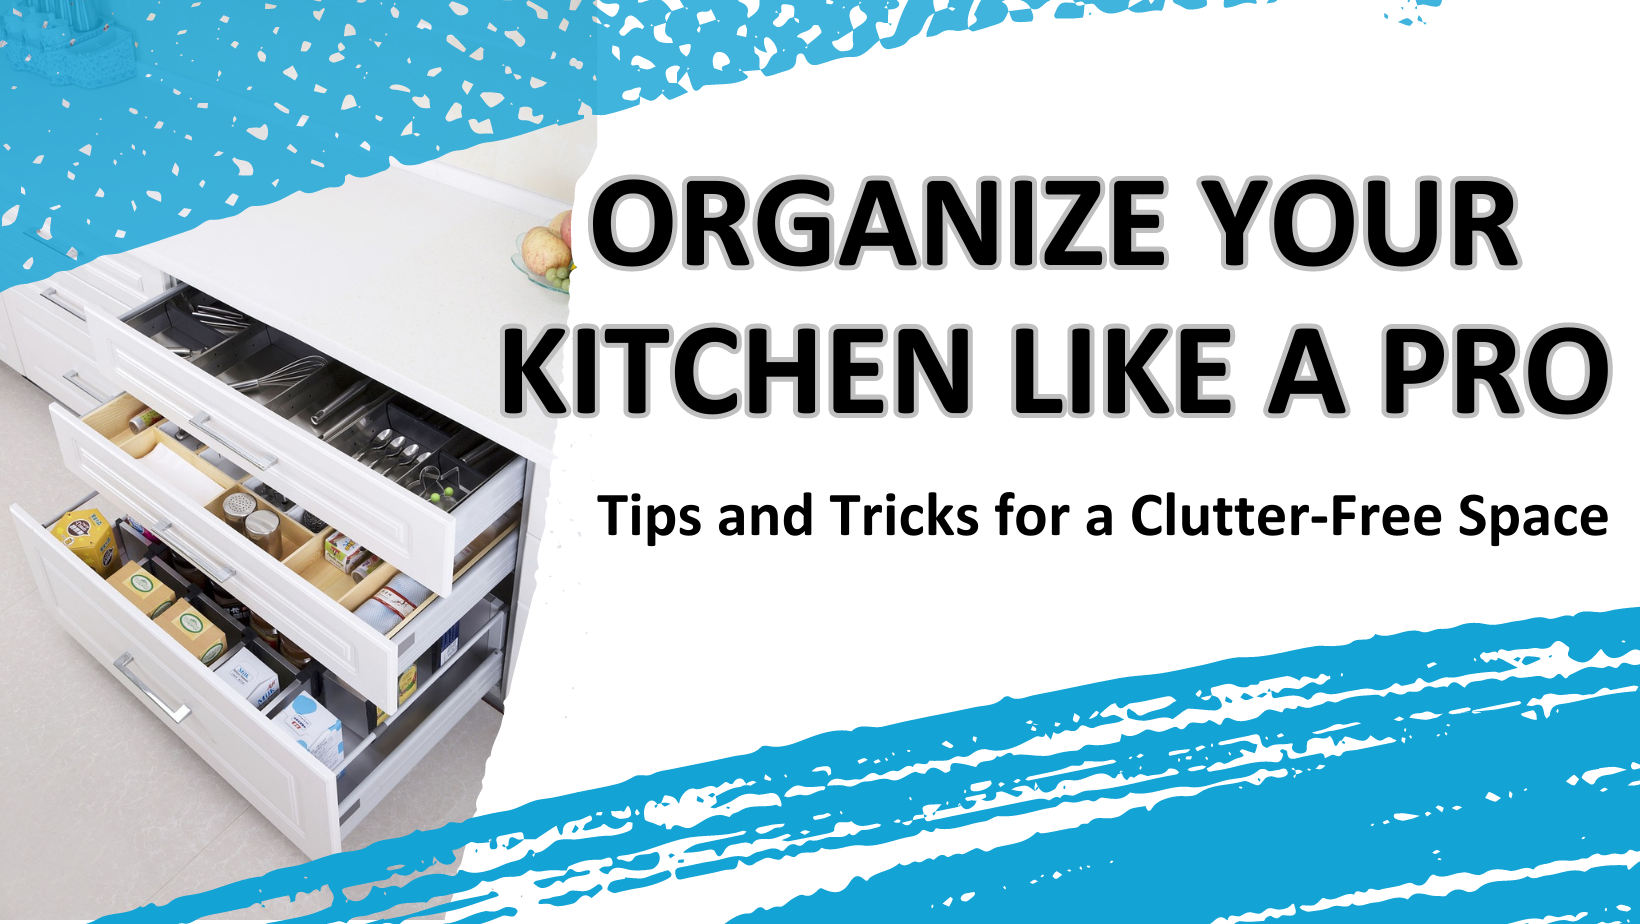 Organize Your Kitchen Like a Pro: Tips and Tricks for a Clutter-Free Space